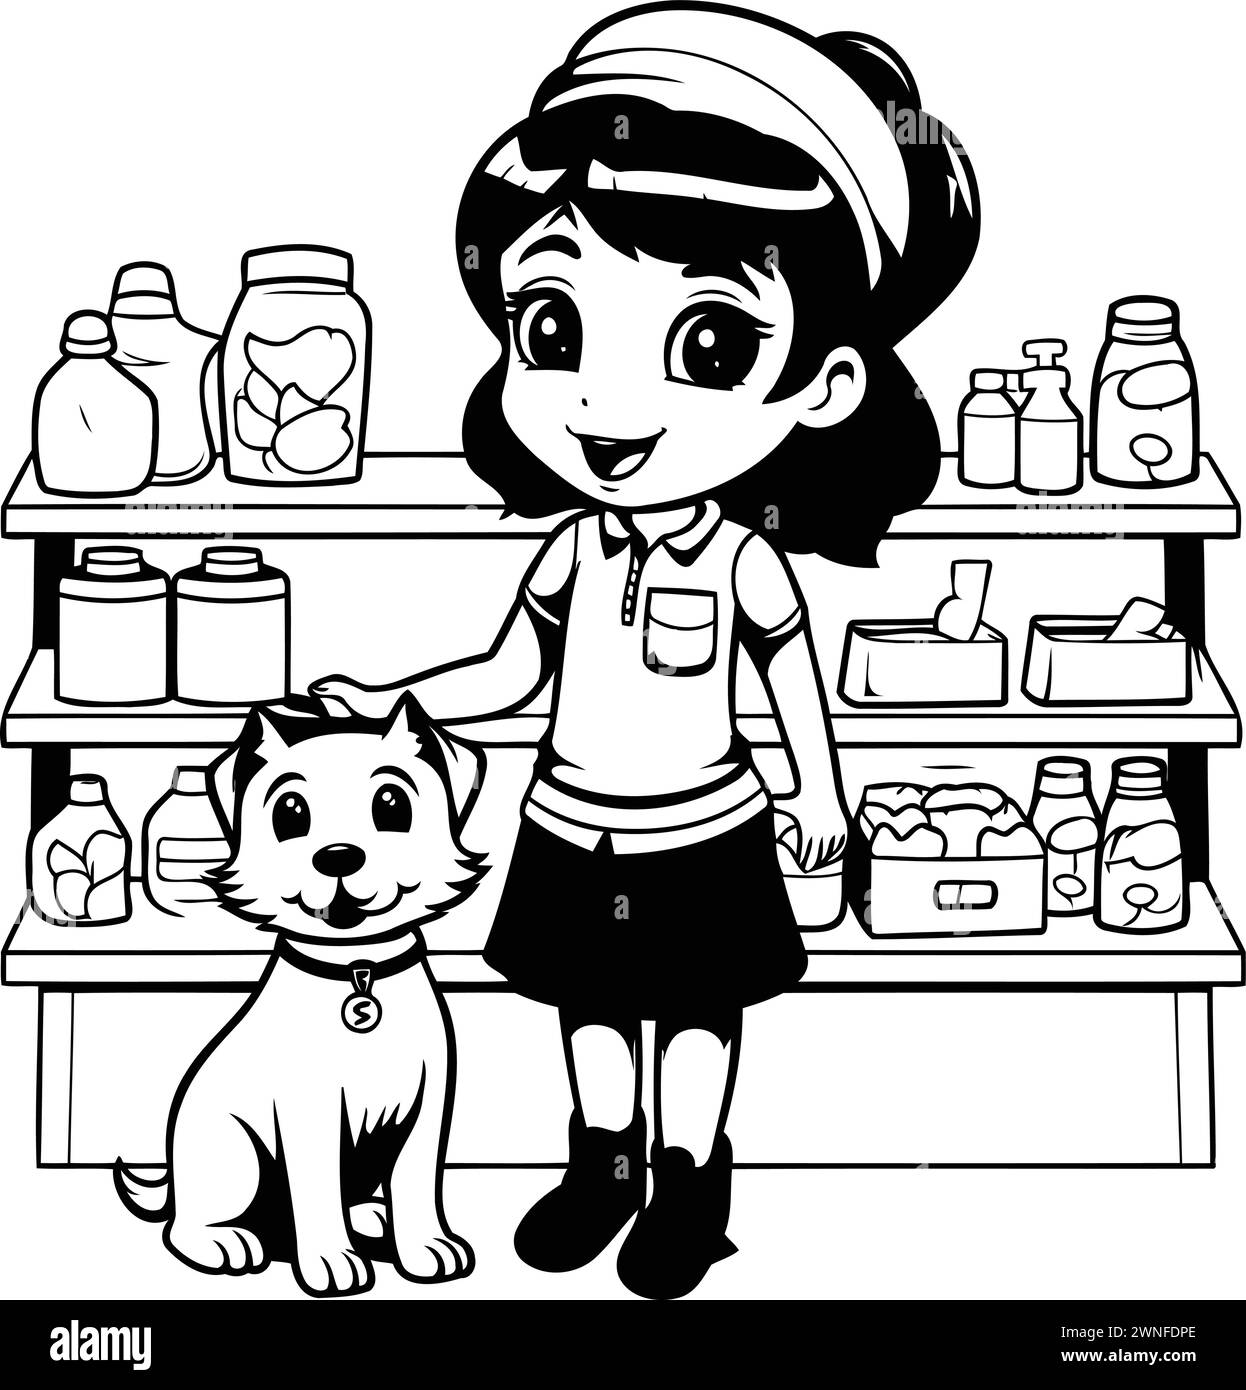 Pet shop girl with cat cartoon in black and white vector illustration graphic design Stock Vector